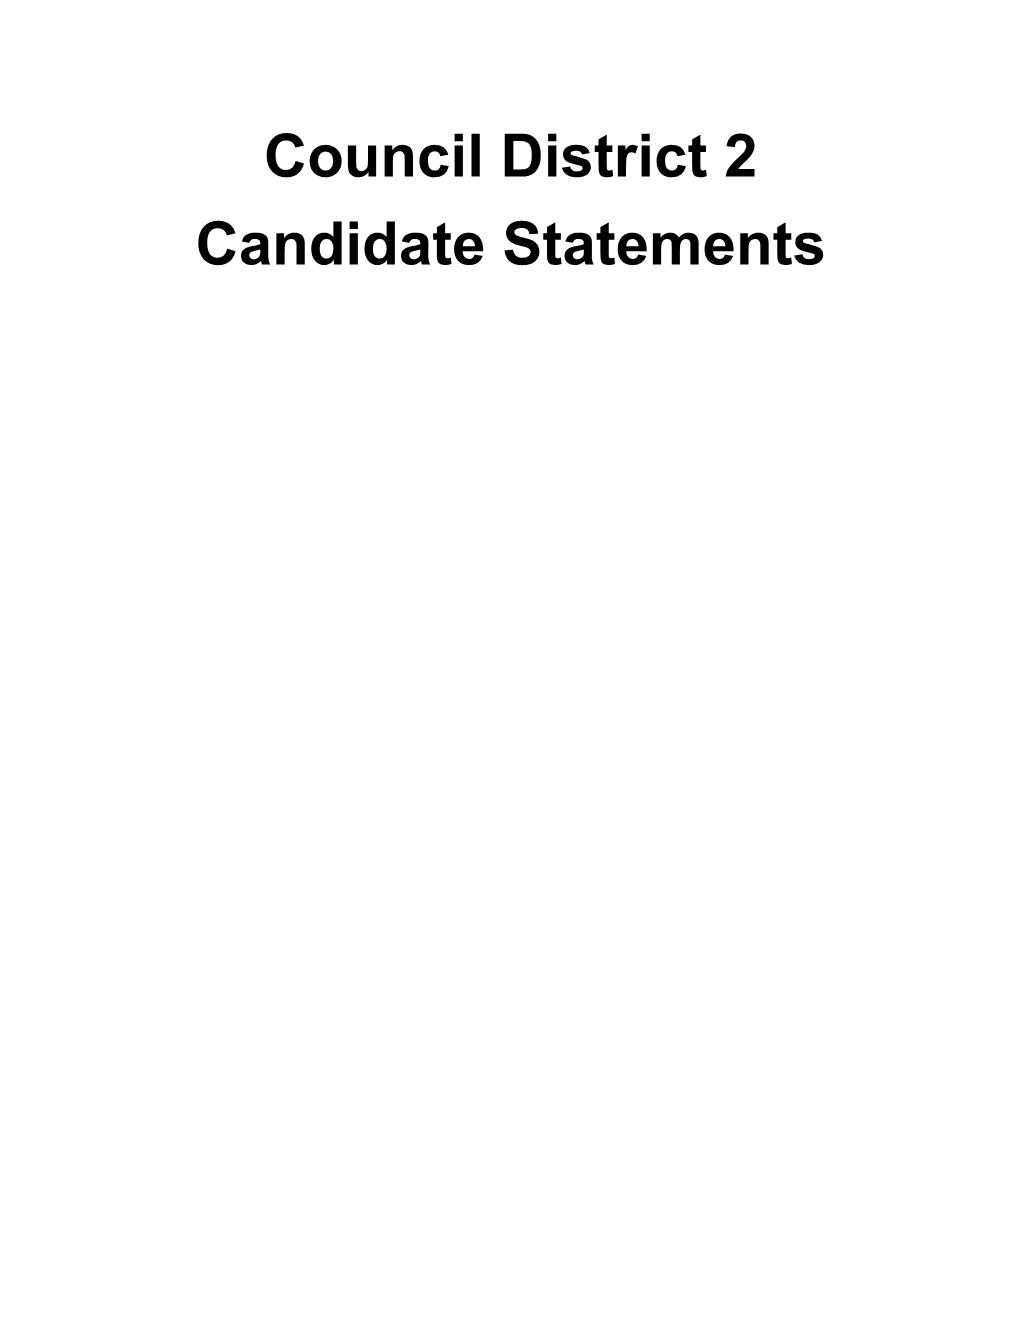 Council District 2 Candidate Statements CITY of SAN DIEGO CANDIDATE’S STATEMENT of QUALIFICATIONS